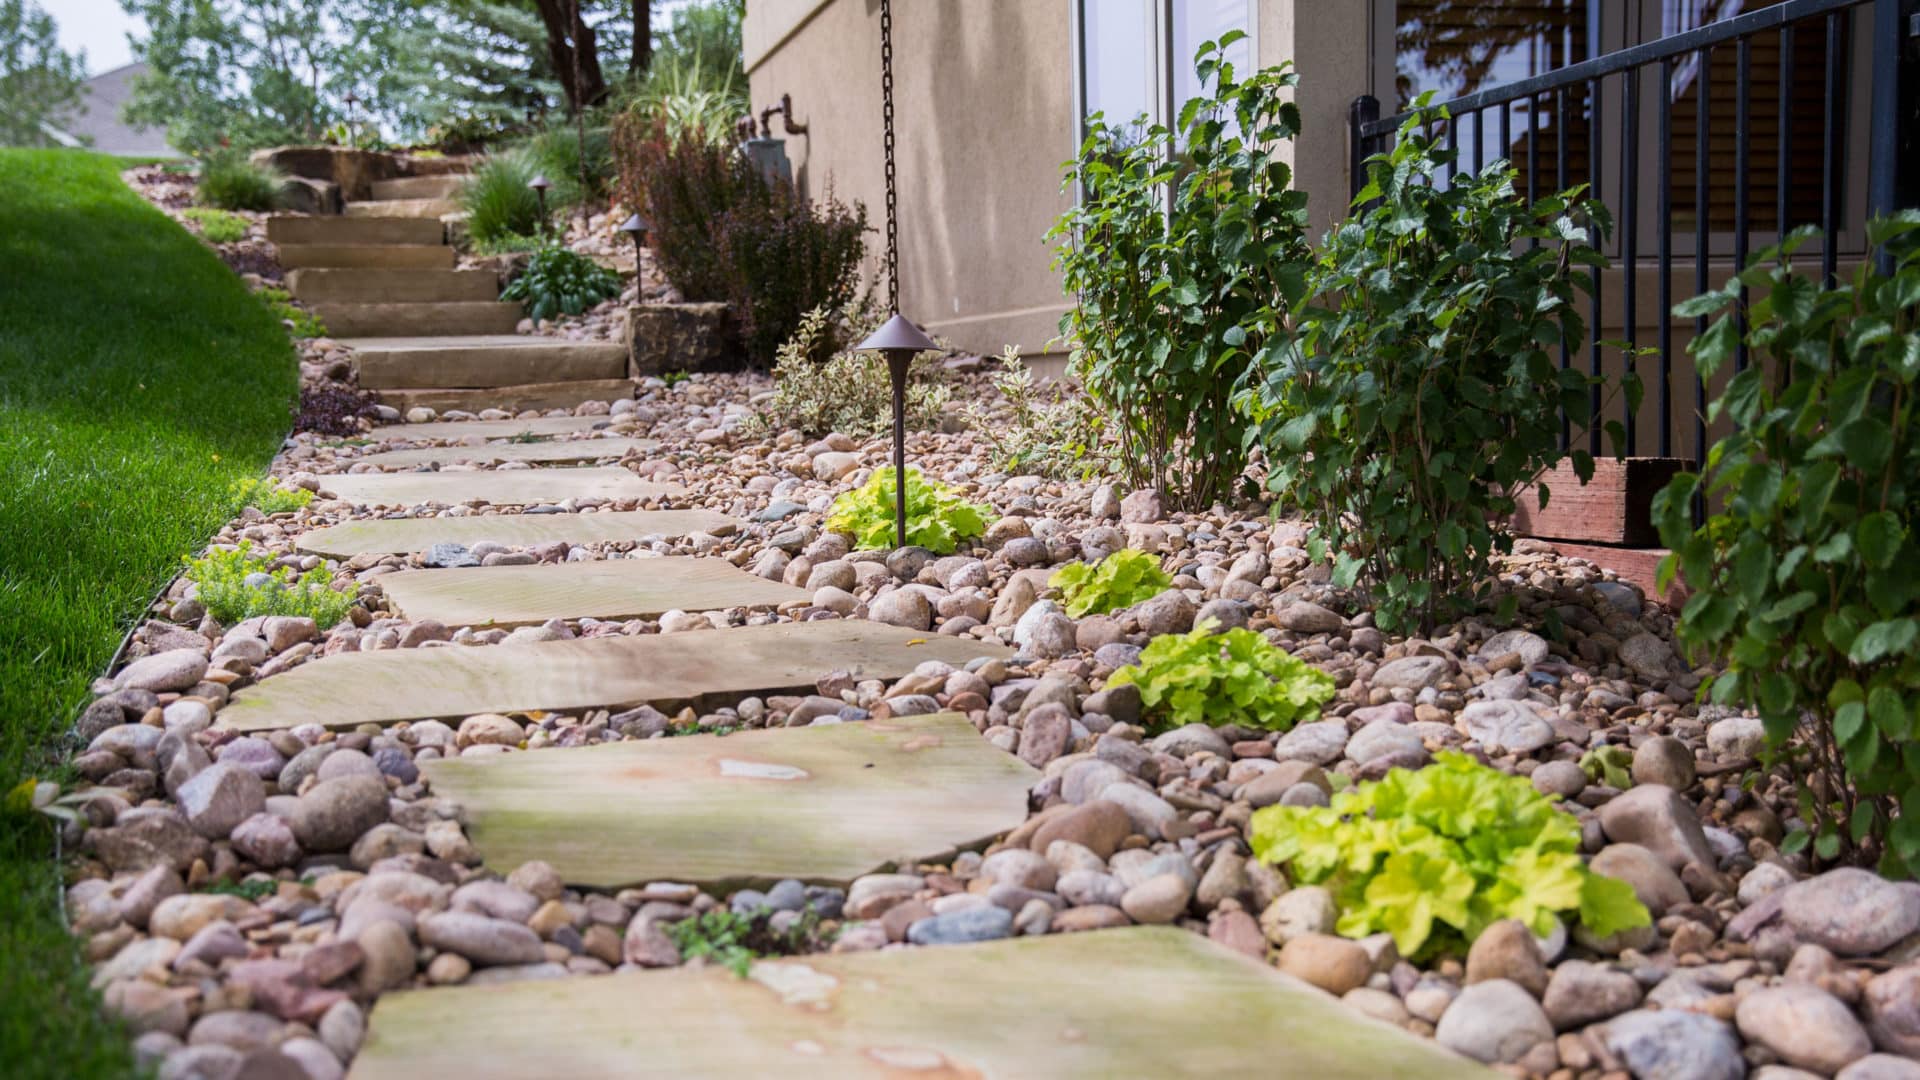 Detailed Landscape Steppers and Path - Flagstone - Patio - Rock Garden